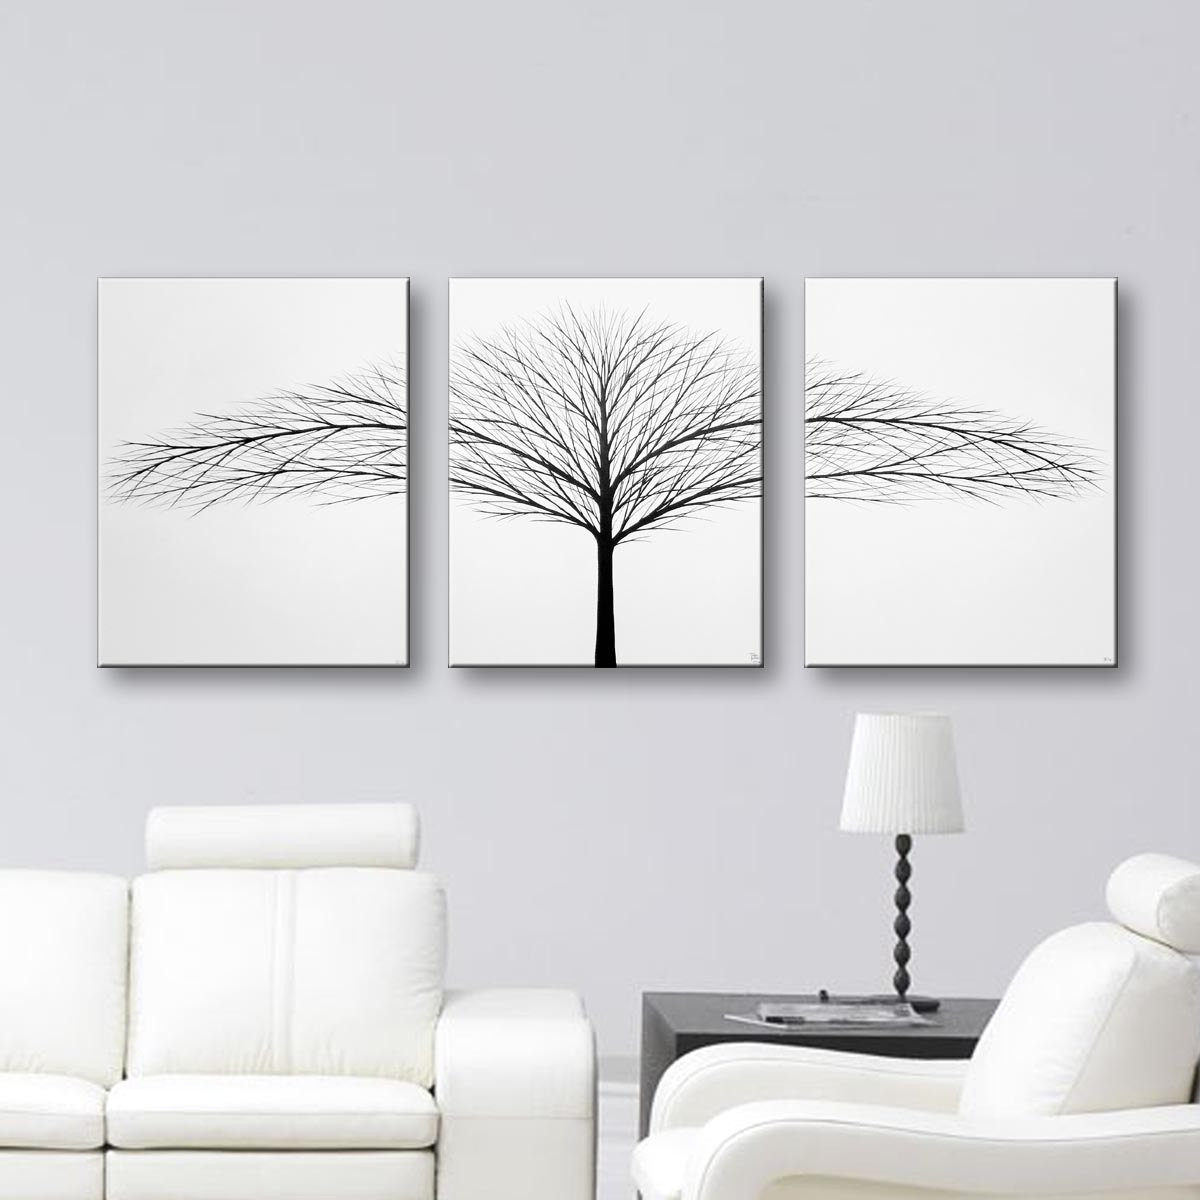 Best ideas about Black Wall Art
. Save or Pin 15 Black and White Wall Decor Ideas Now.